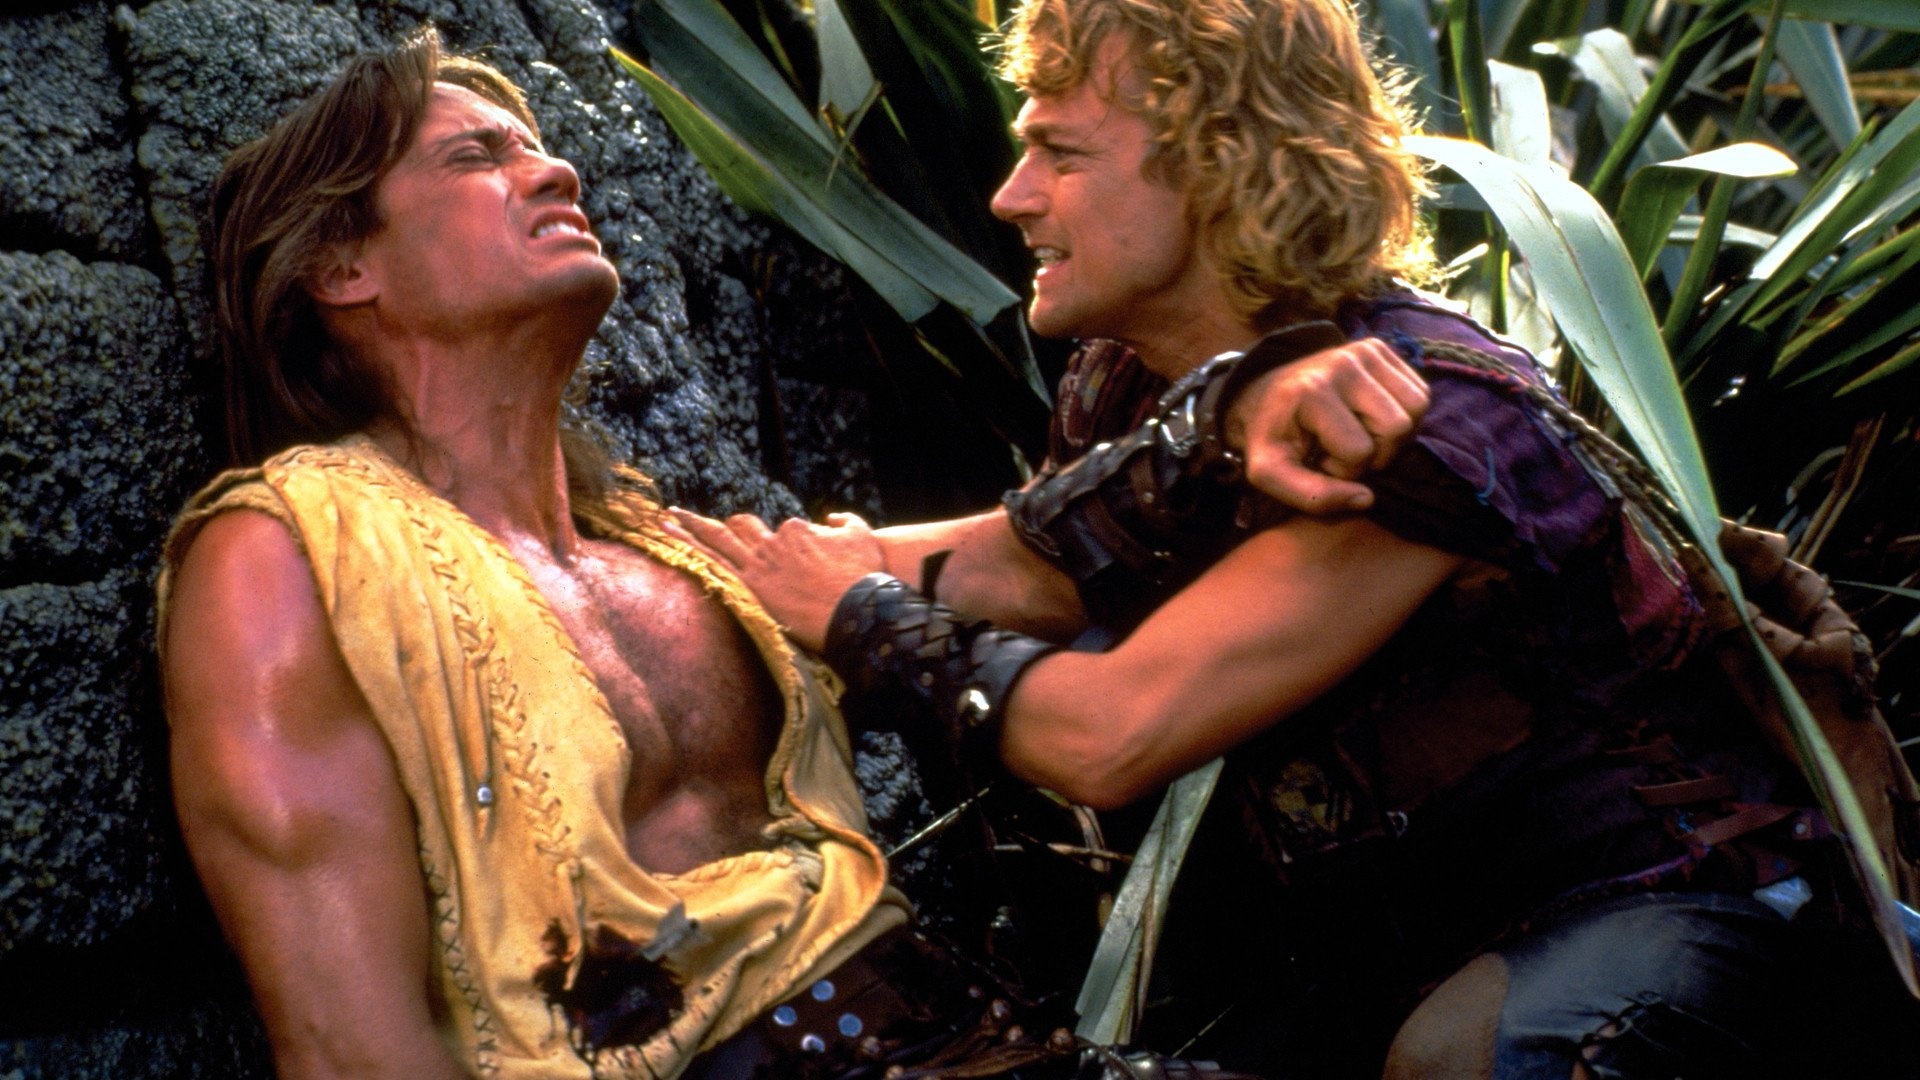 Hercules: The Legendary Journeys (TV Series): Kevin Sorbo and Michael Hurst as Iolaus - a sidekick, best friend, and companion. 1920x1080 Full HD Wallpaper.